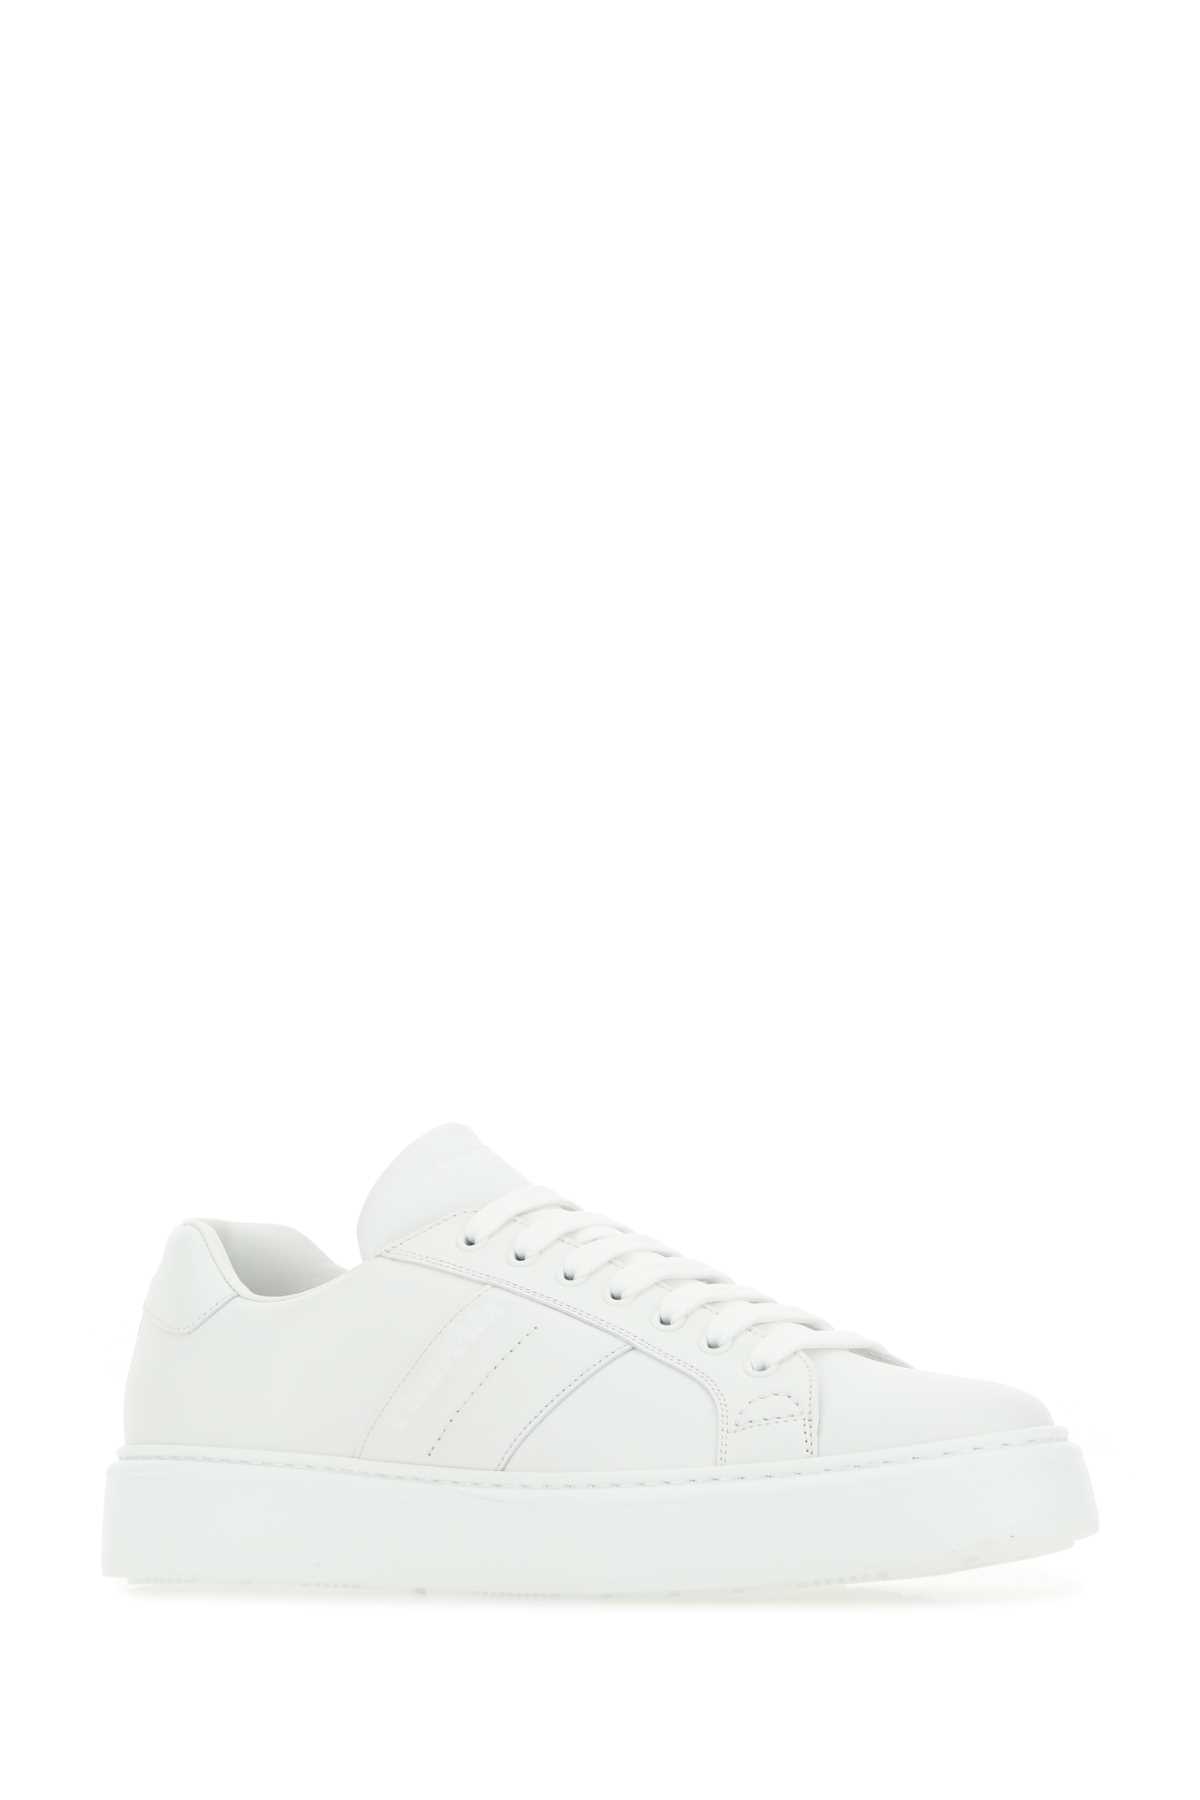 Shop Church's White Leather Mach 3 Sneakers In F0abk